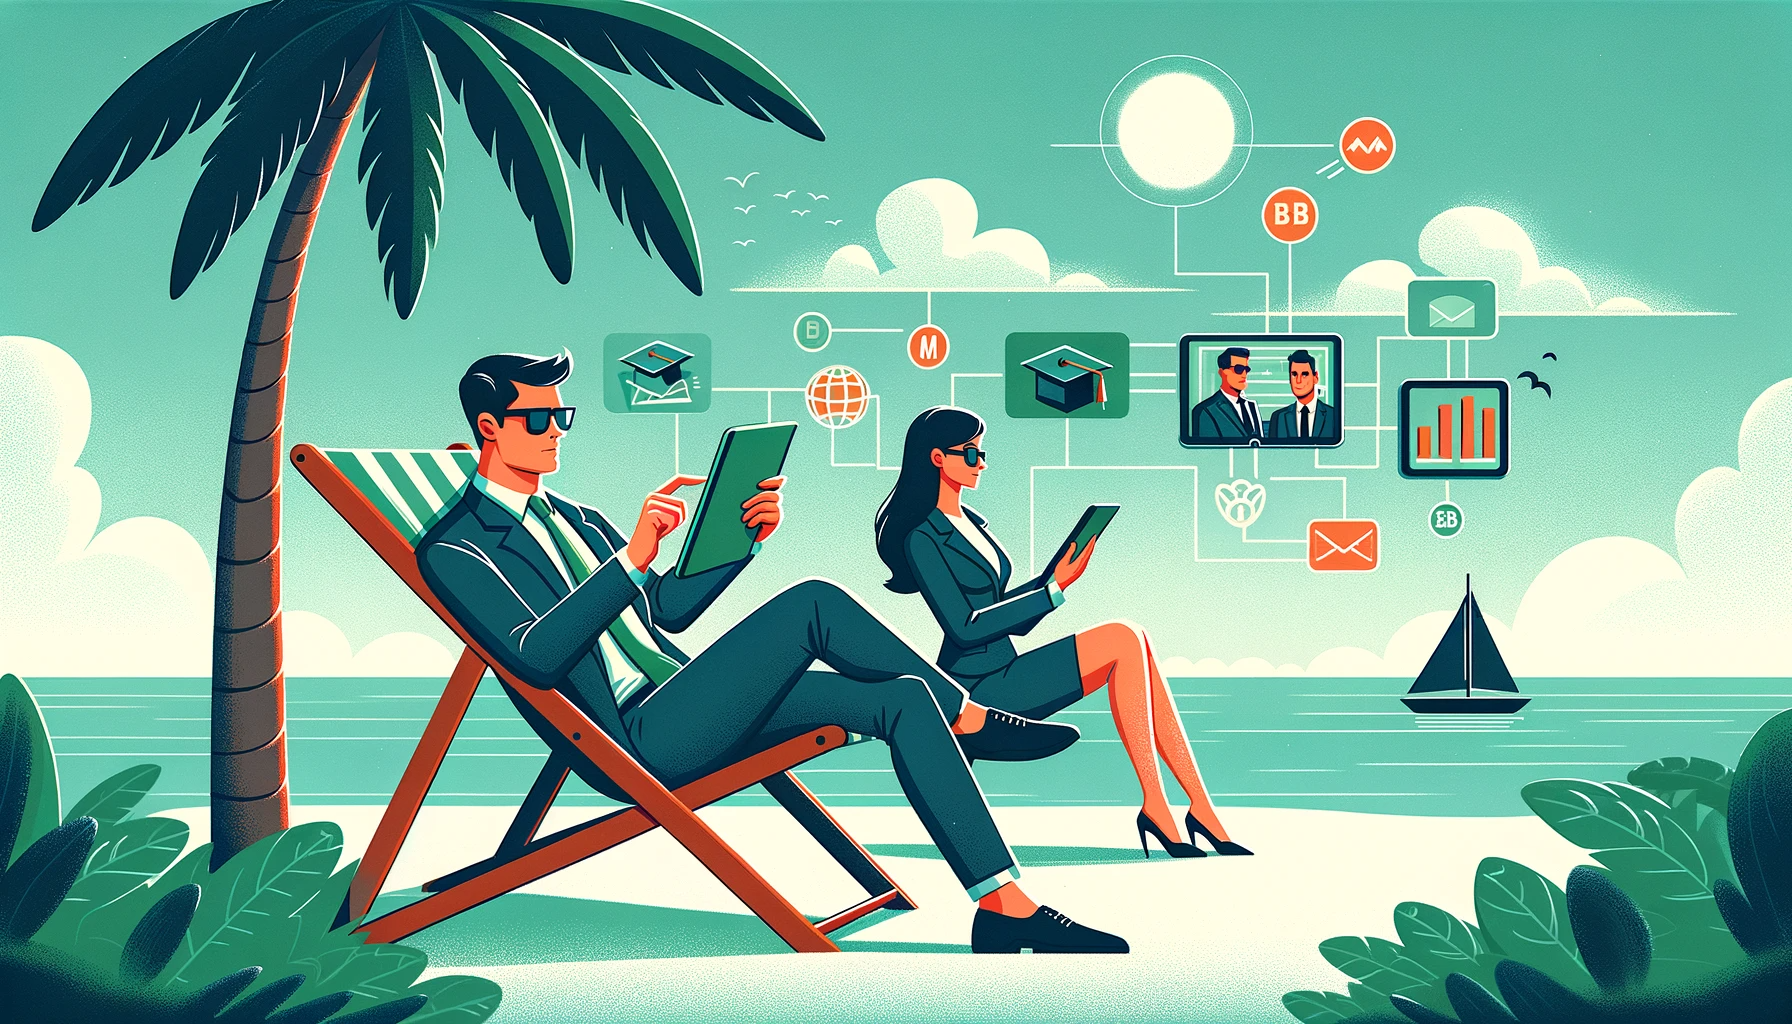 Optimising an online MBA - A 30-year-old man in a business suit lounging on a beach chair, engrossed in a virtual MBA lecture on his tablet, accompanied by a woman in business attire, also engaged with her digital device.